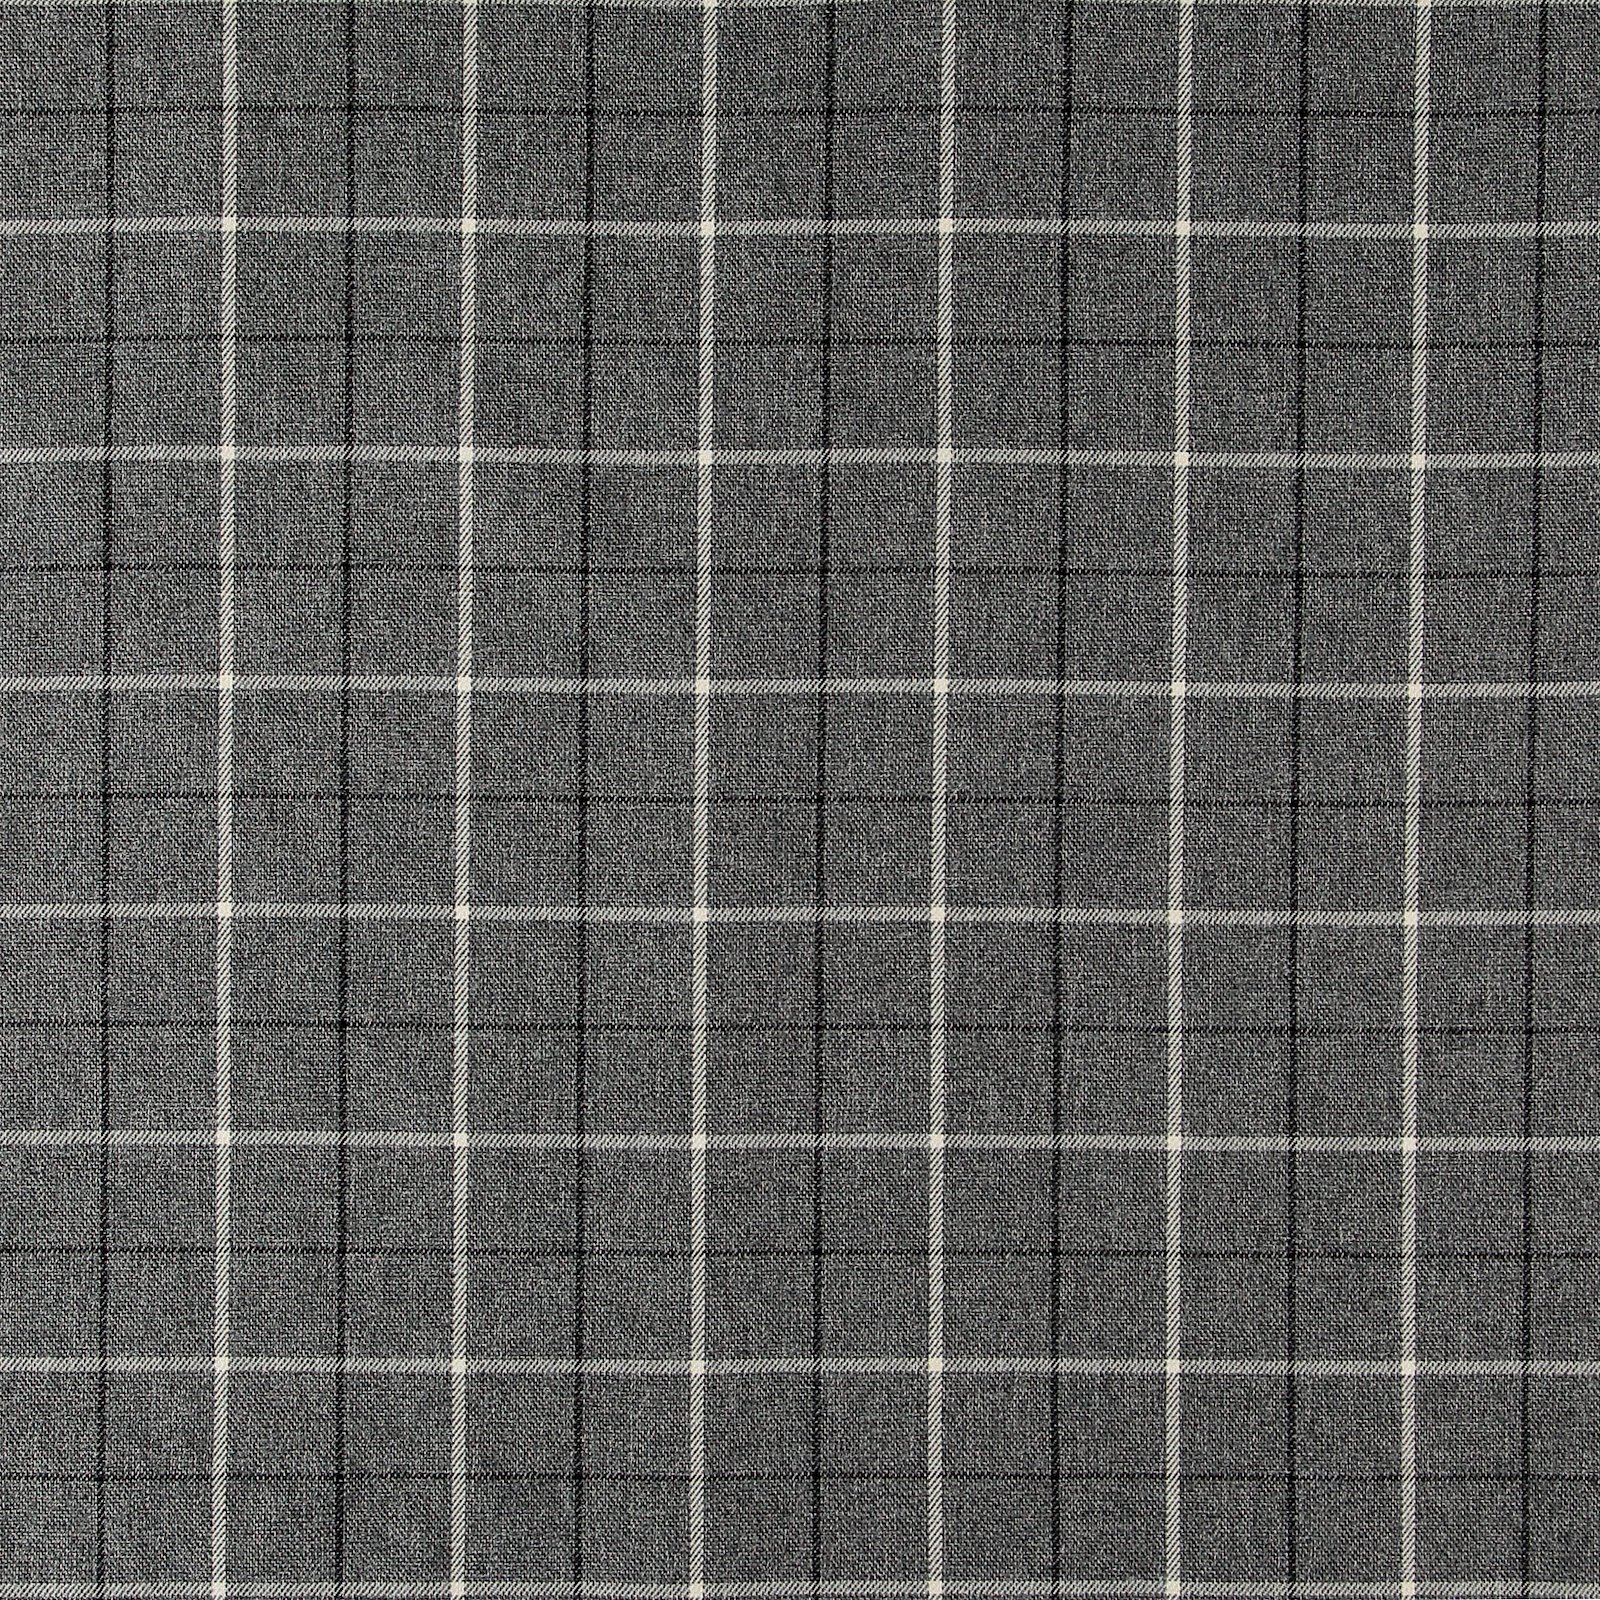 Upholstery fabric wool look grey w check 823796_pack_sp